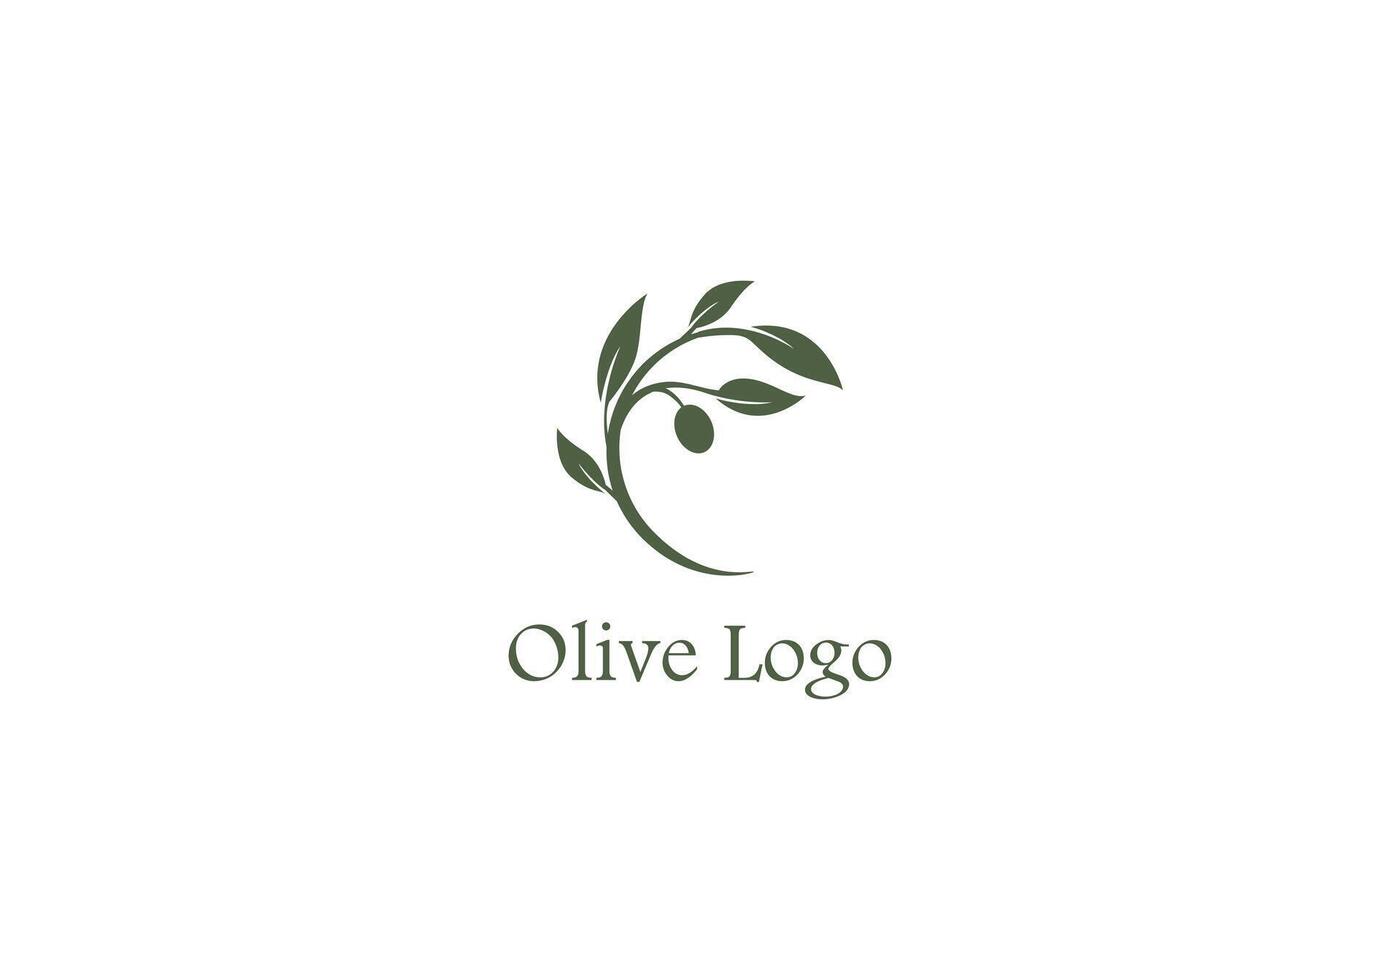 Logo Olive Branch with Leafs, elegant modern and minimalist, editable color vector